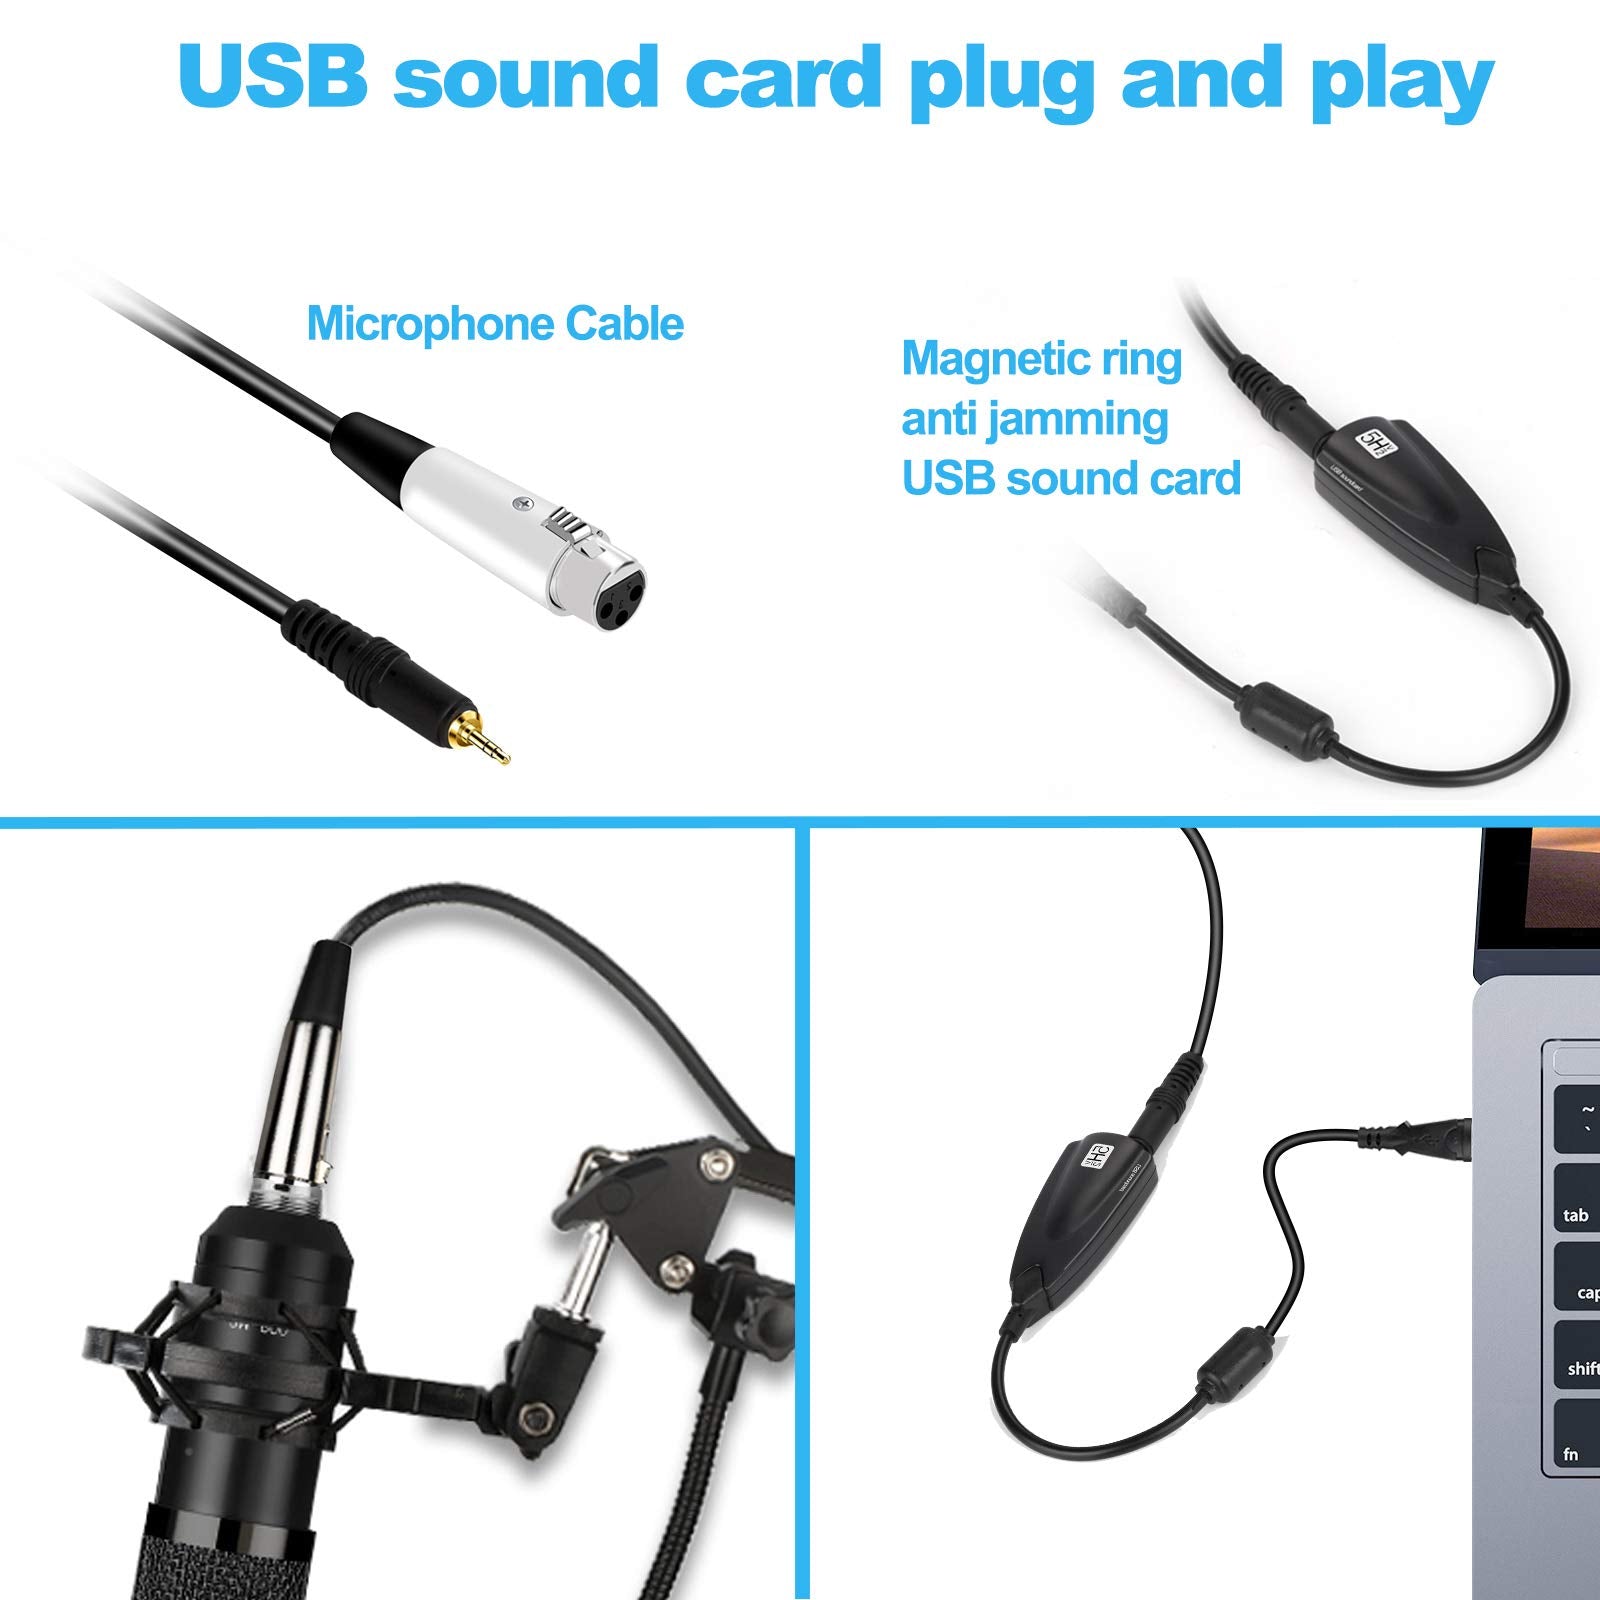 Rybozen USB Microphone, 192KHZ/24Bit Professional PC Computer Podcast Cardioid Condenser Microphone Kit with Sound Chipset Boom Arm for Recording, Karaoke, Gaming, Streaming,Meeting, YouTube